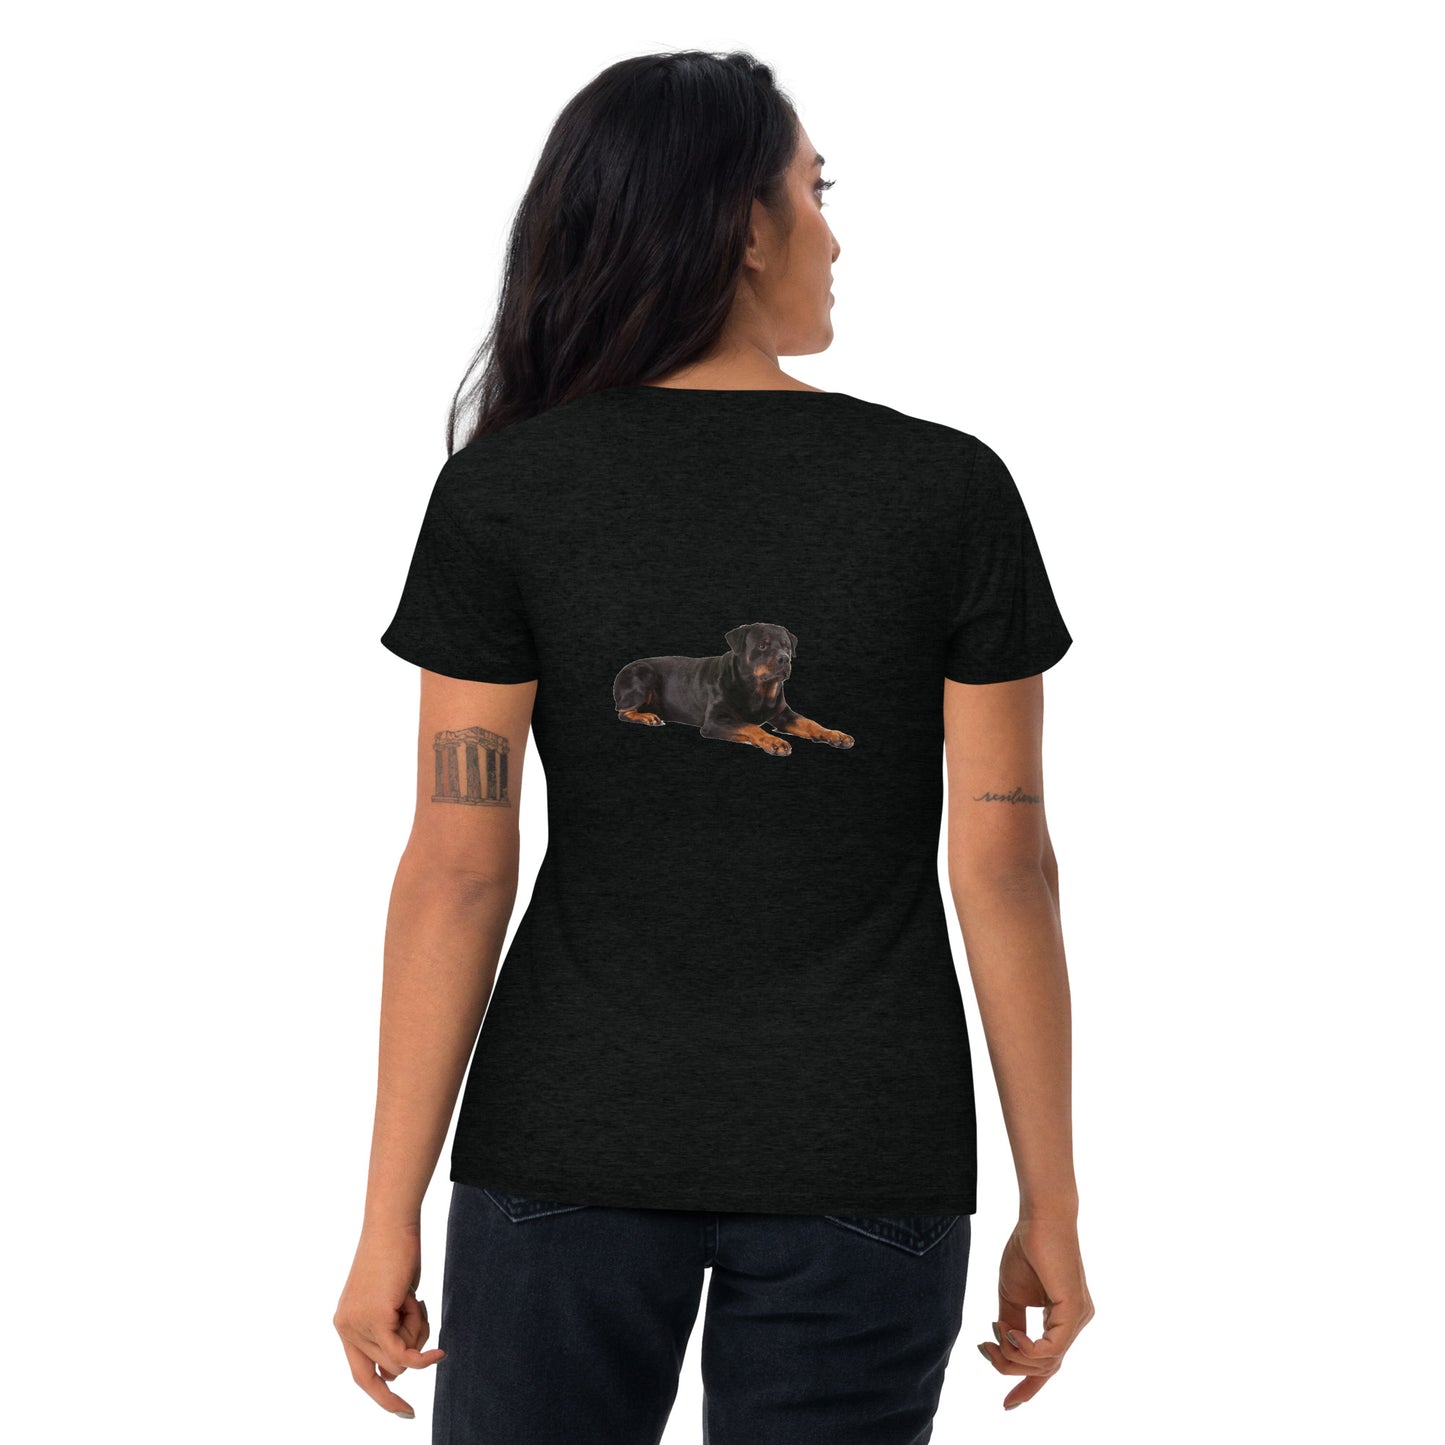 My Rottweiler Is Not Aggressive Embroidered Unisex T-Shirt